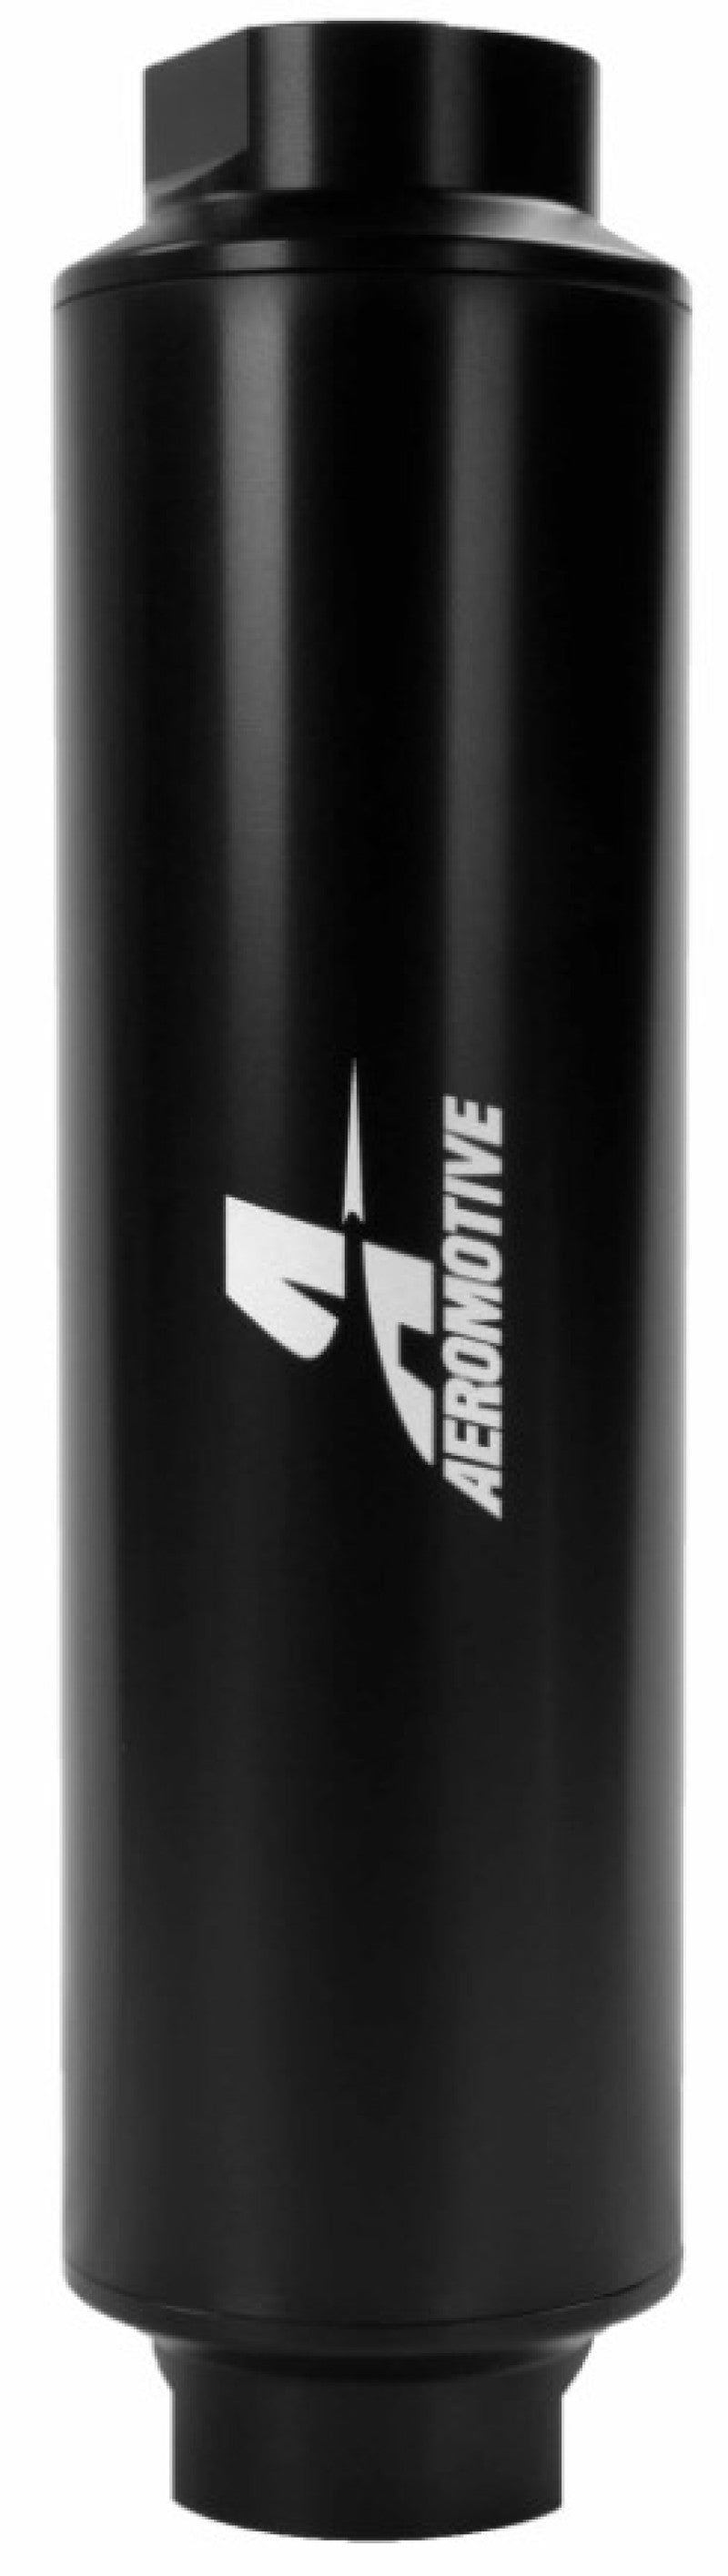 Aeromotive 12361 Extreme Flow 10-m Fabric AN-16 ORB Fuel Filter